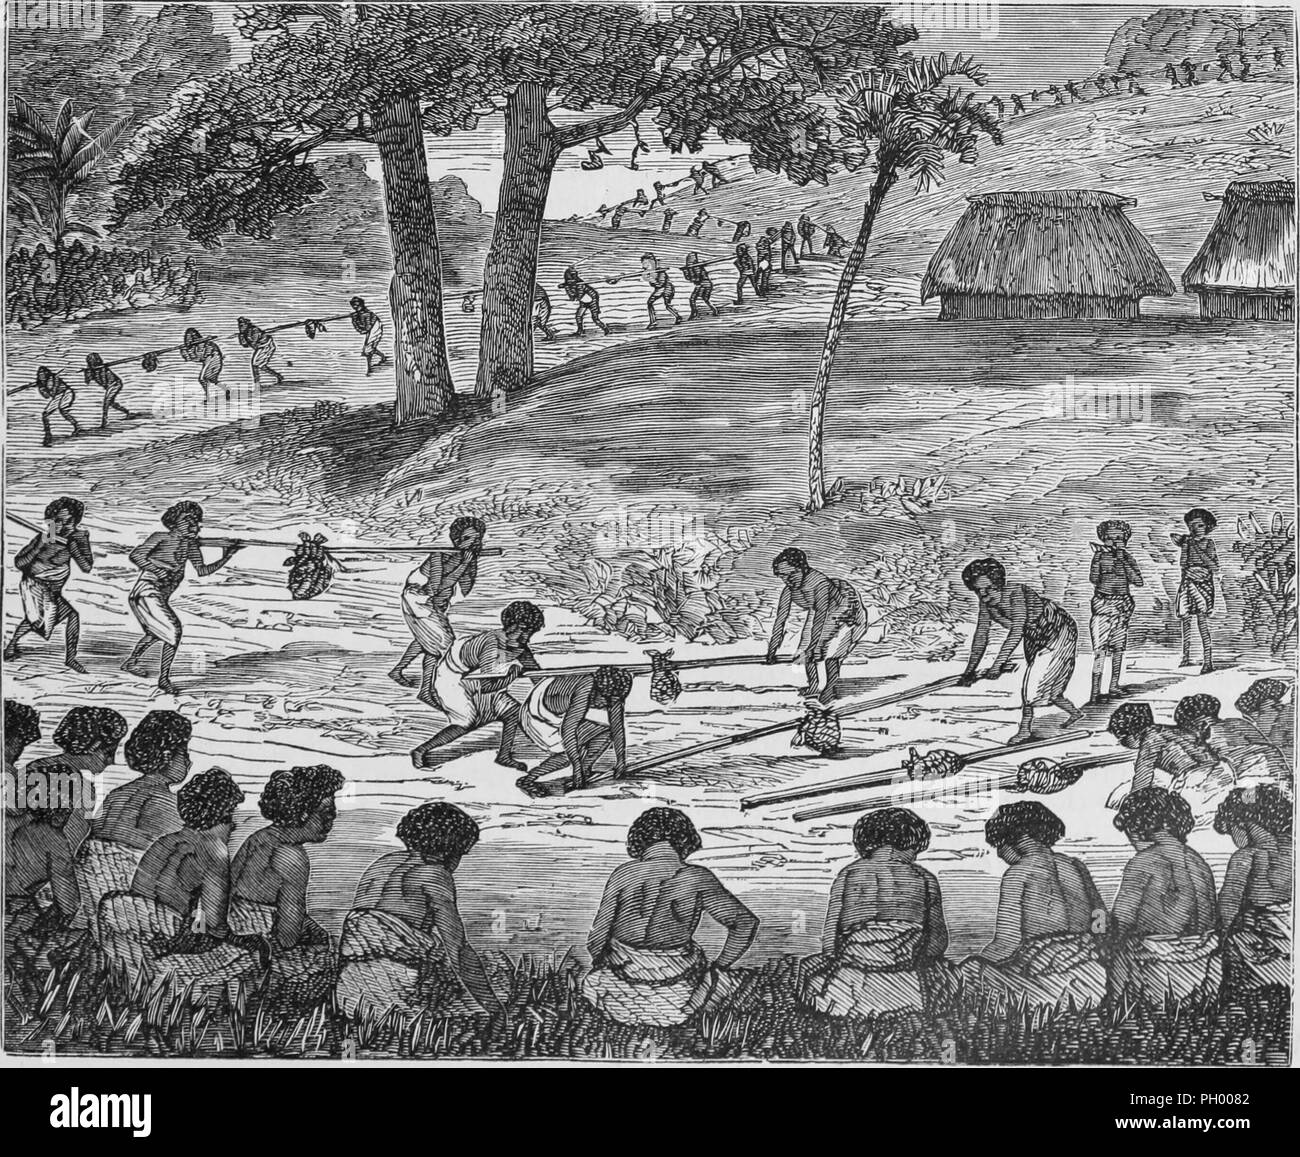 Black and white vintage print, depicting a long line of Tongan men, carrying poles with yams strung at the middle, as they bring the best of their crop and place it on the ground in front of the seated chief and matapules (advisors) during the Inasi Festival, published in John George Wood's volume 'The uncivilized races of men in all countries of the world, being a comprehensive account of their manners and customs, and of their physical, social, mental, moral and religious characteristics', 1877. Courtesy Internet Archive. () Stock Photo